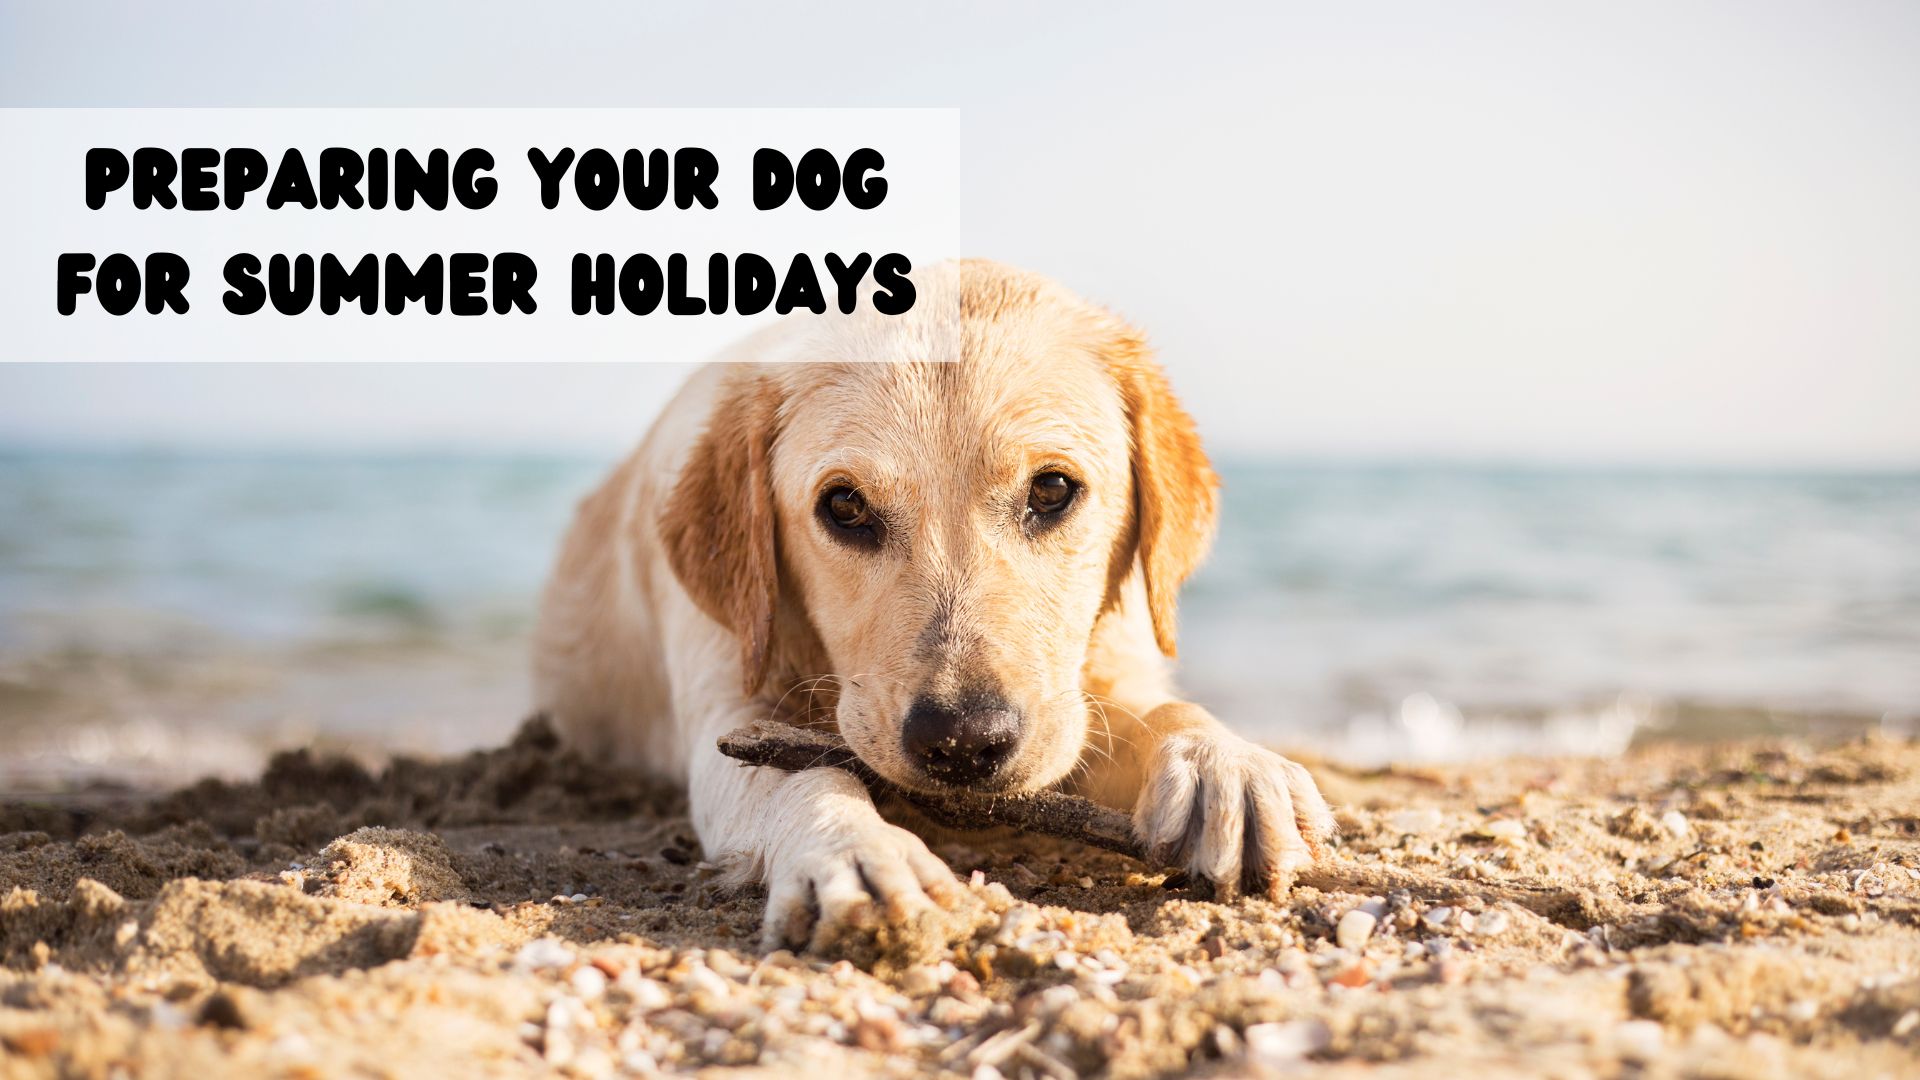 Preparing your dog for summer holidays